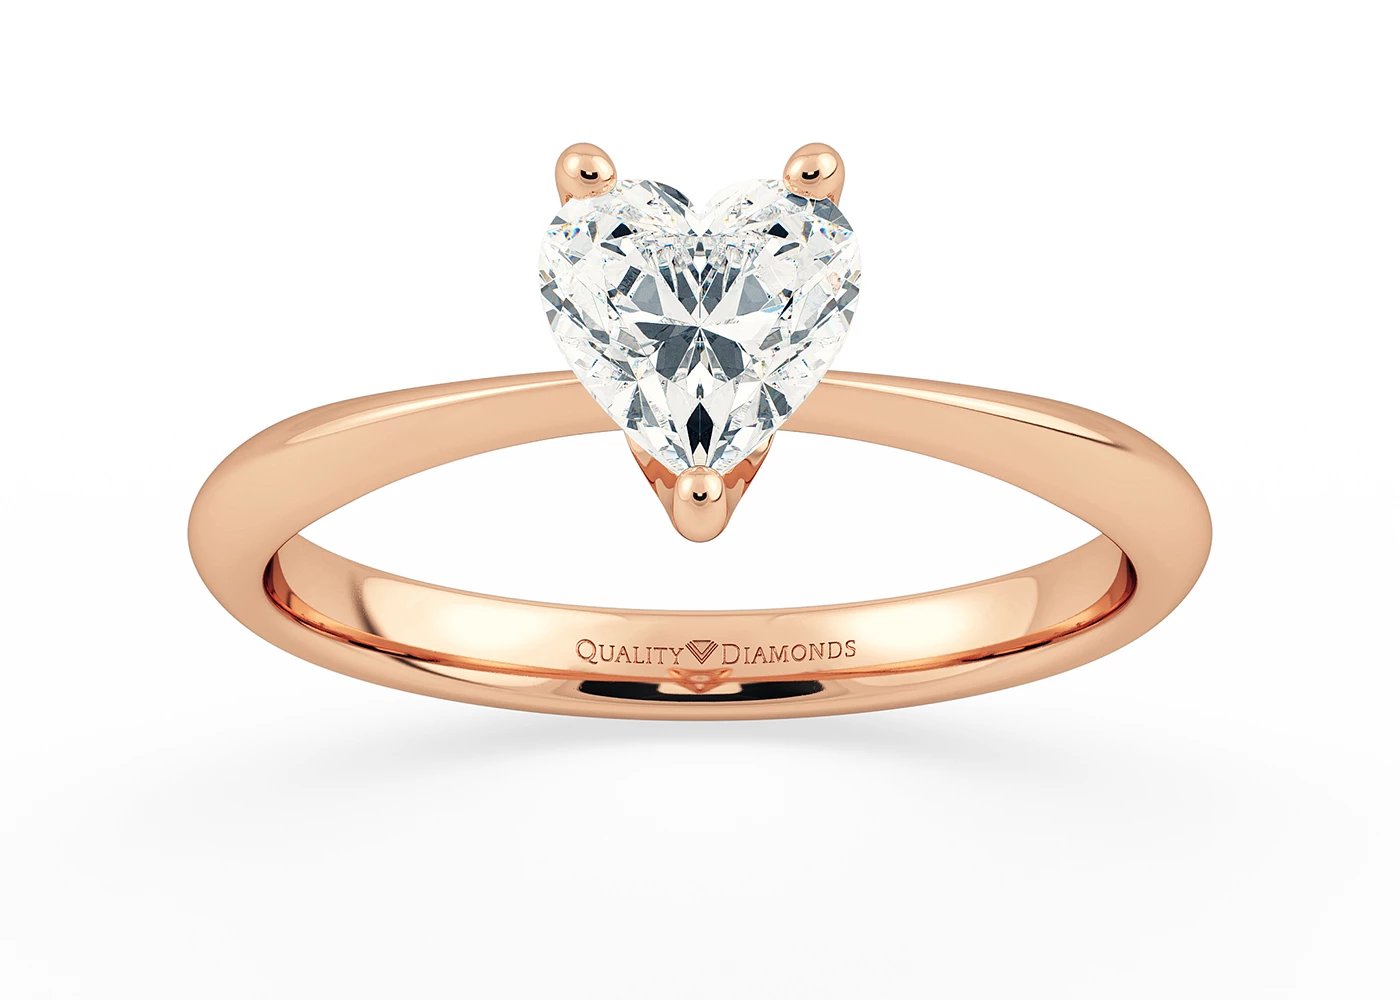 Half Carat Heart Solitaire Diamond Engagement Ring in 18K Rose Gold